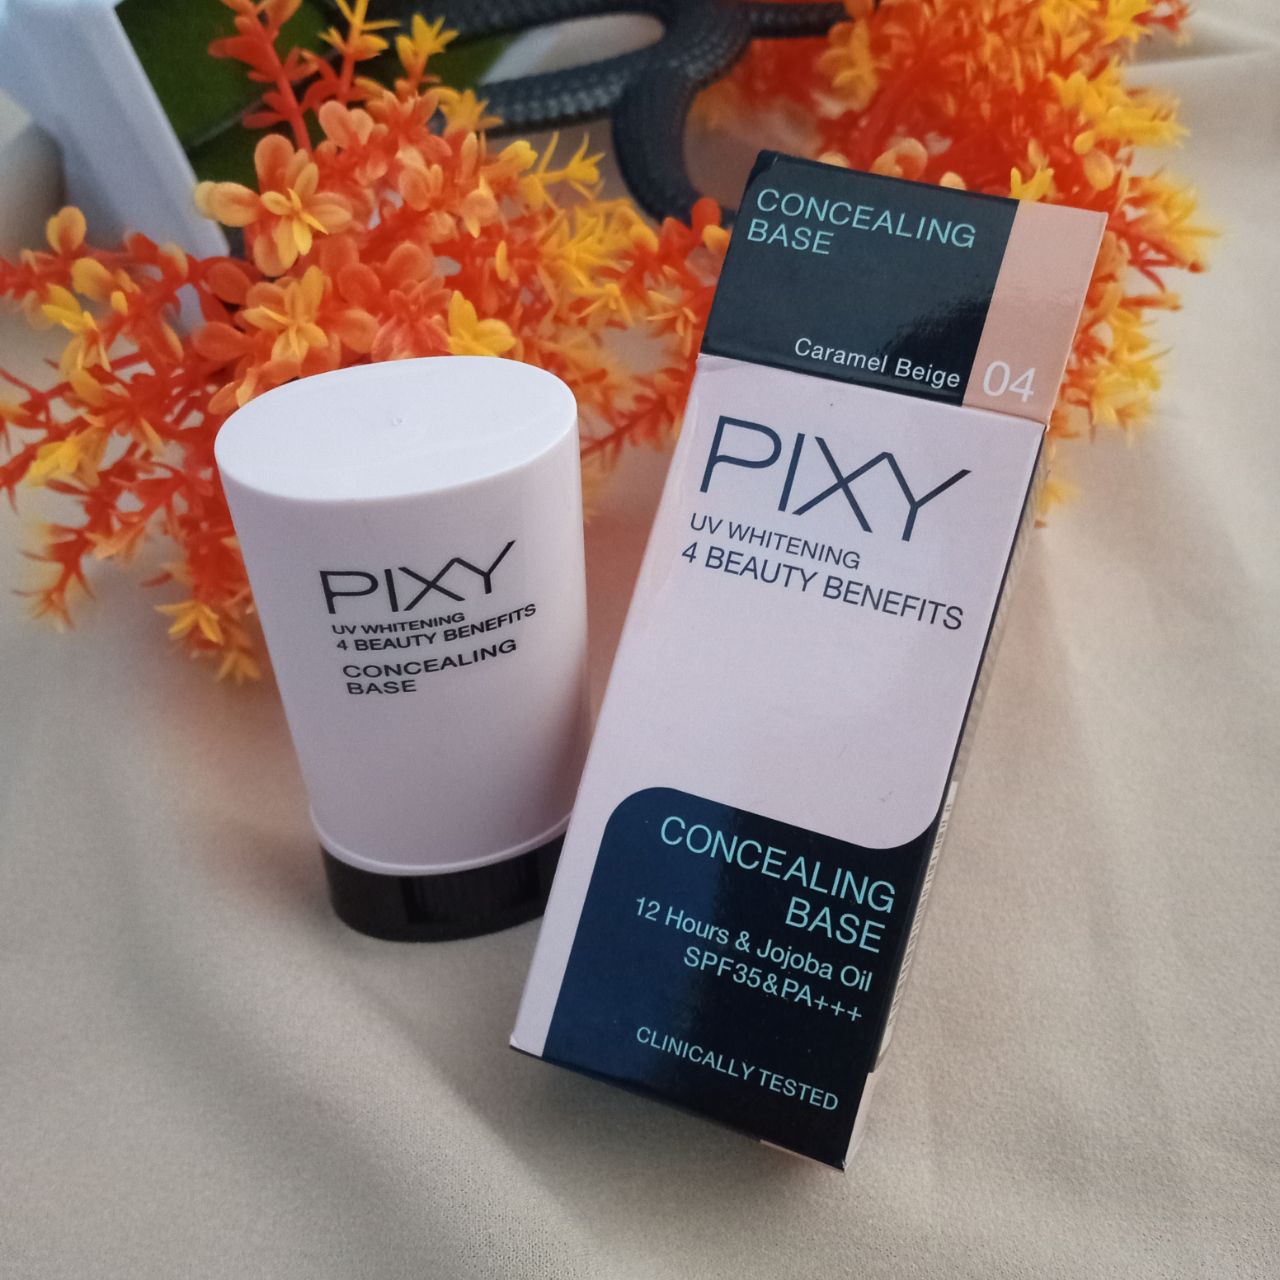 ini adalah Pixy Concealing Base 04 Caramel Beige, brand: Pixy, age_group: all ages, gender: female